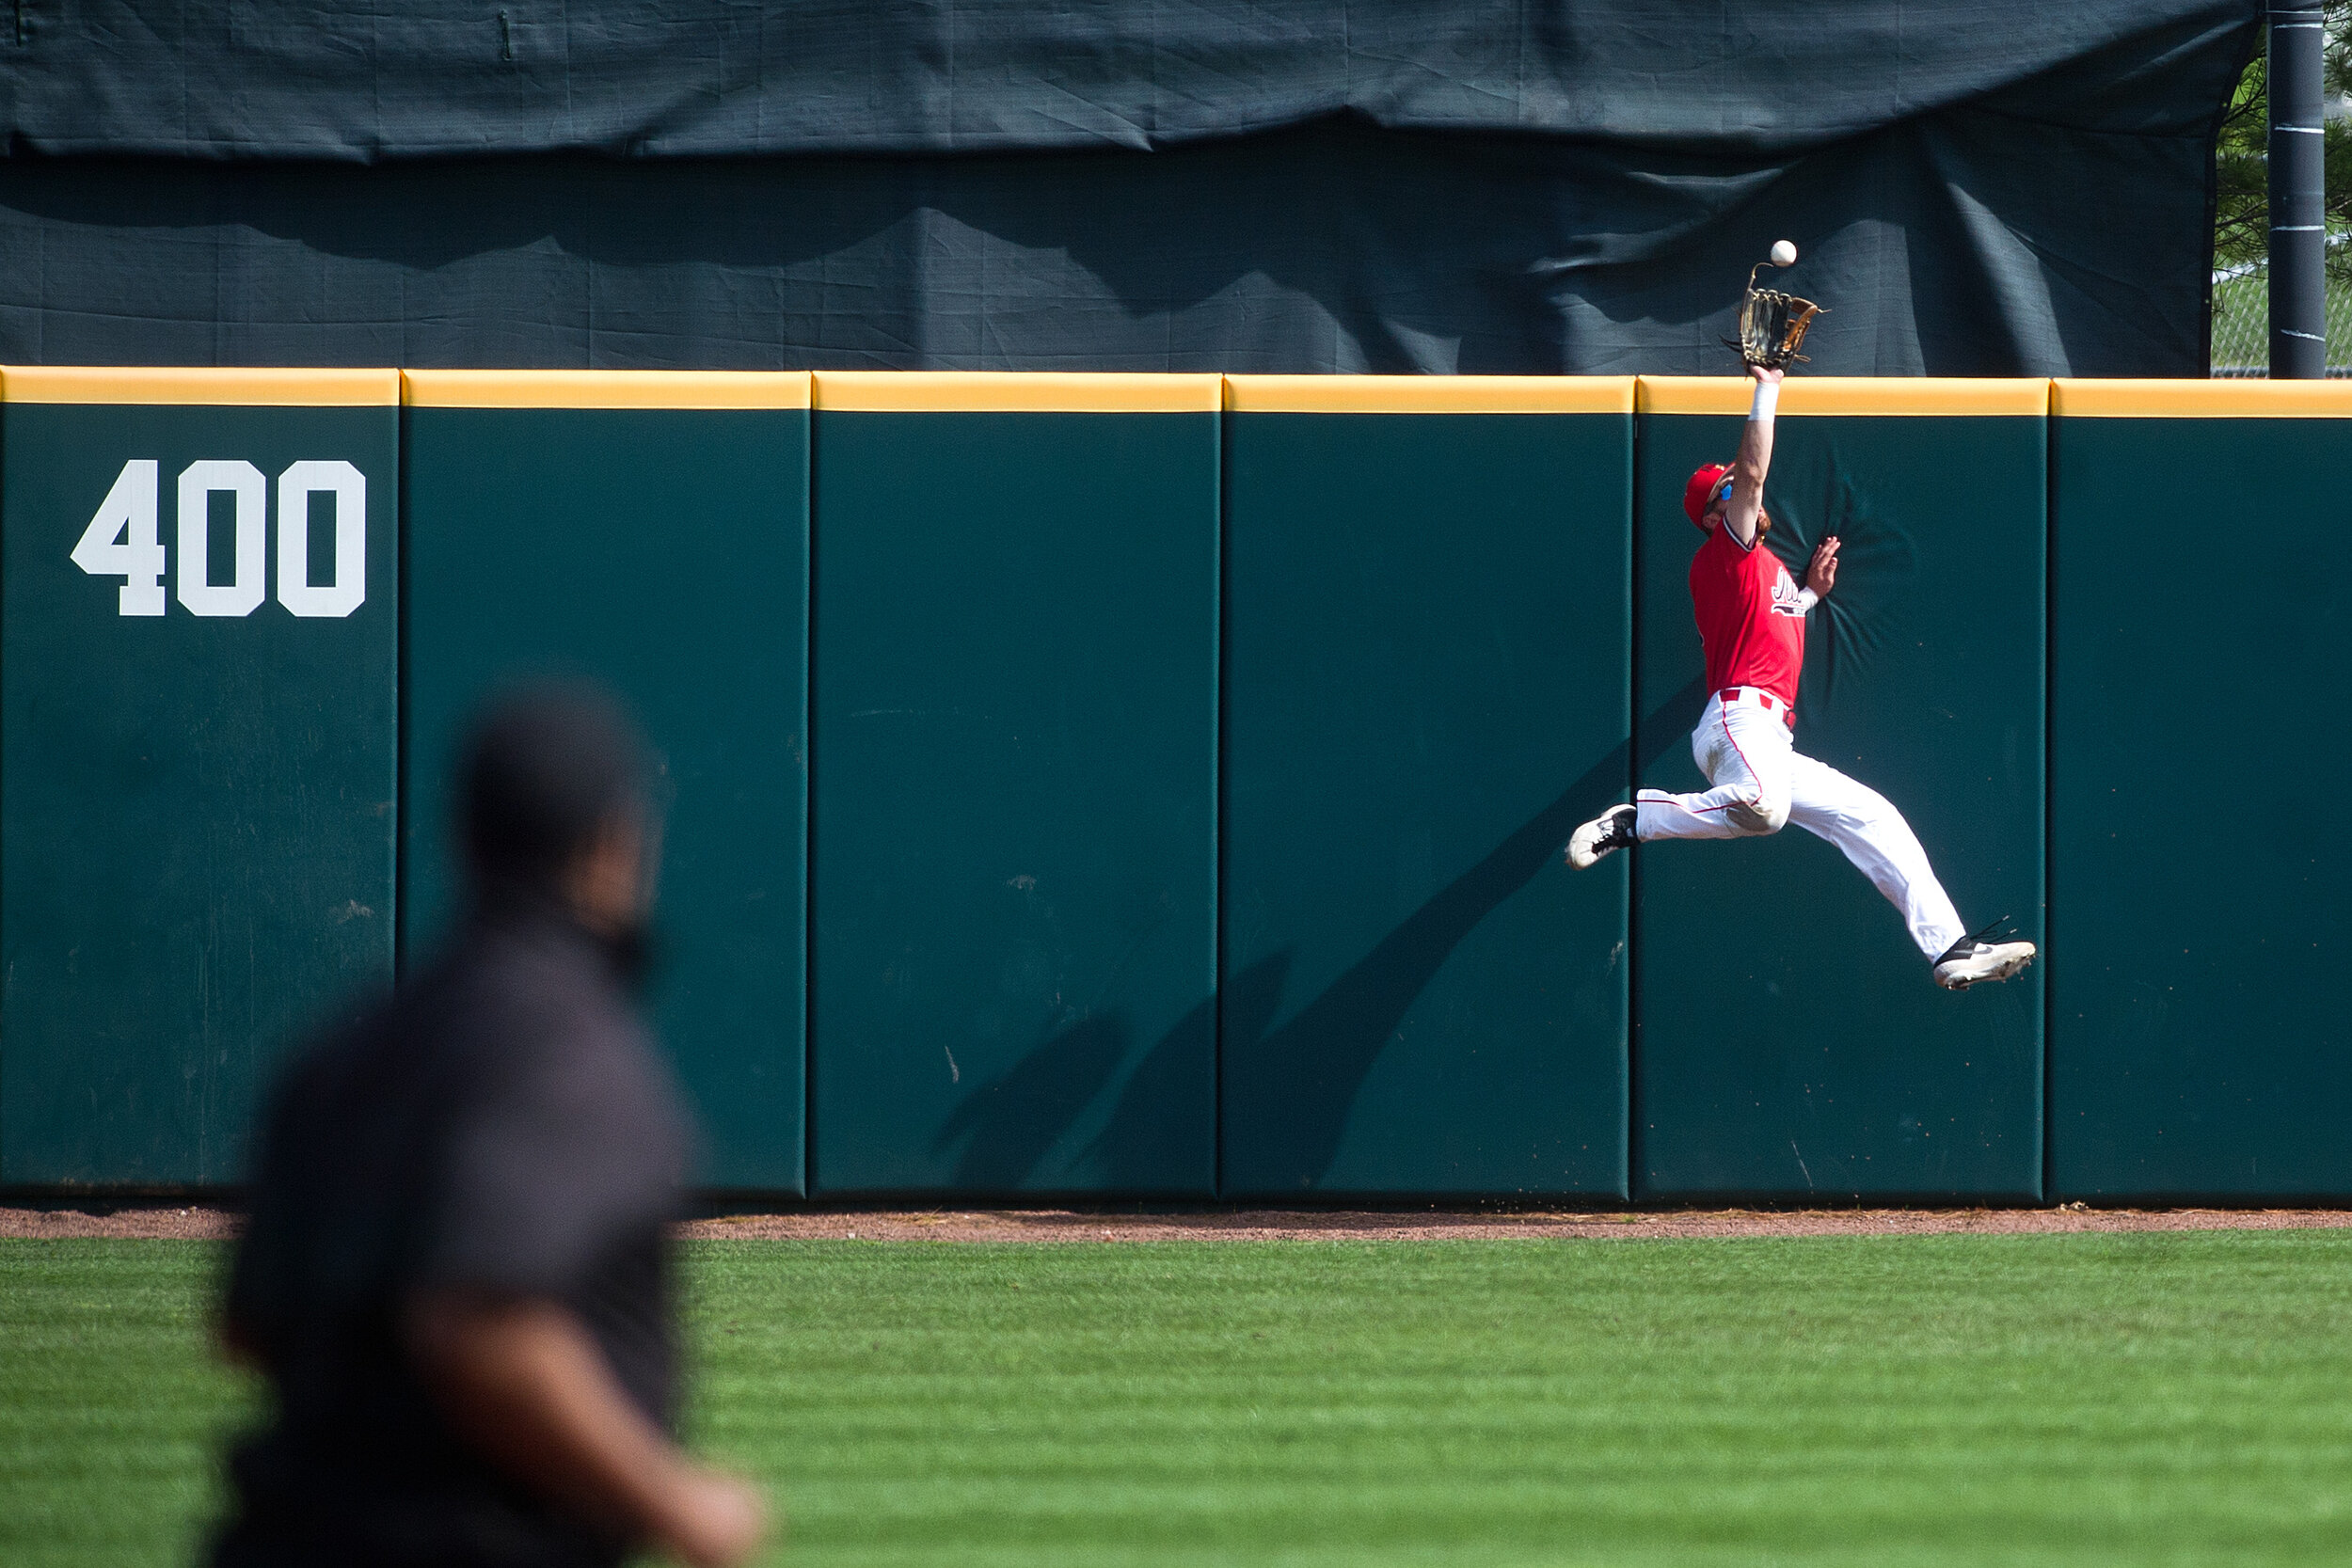  Illinois State outfielder John Rave makes a catch at the wall during a Missouri Valley Conference baseball game against Indiana State on Saturday, May 4, 2019, at Duffy Bass Field in Normal, Illinois. Indiana State won, 13-1. 